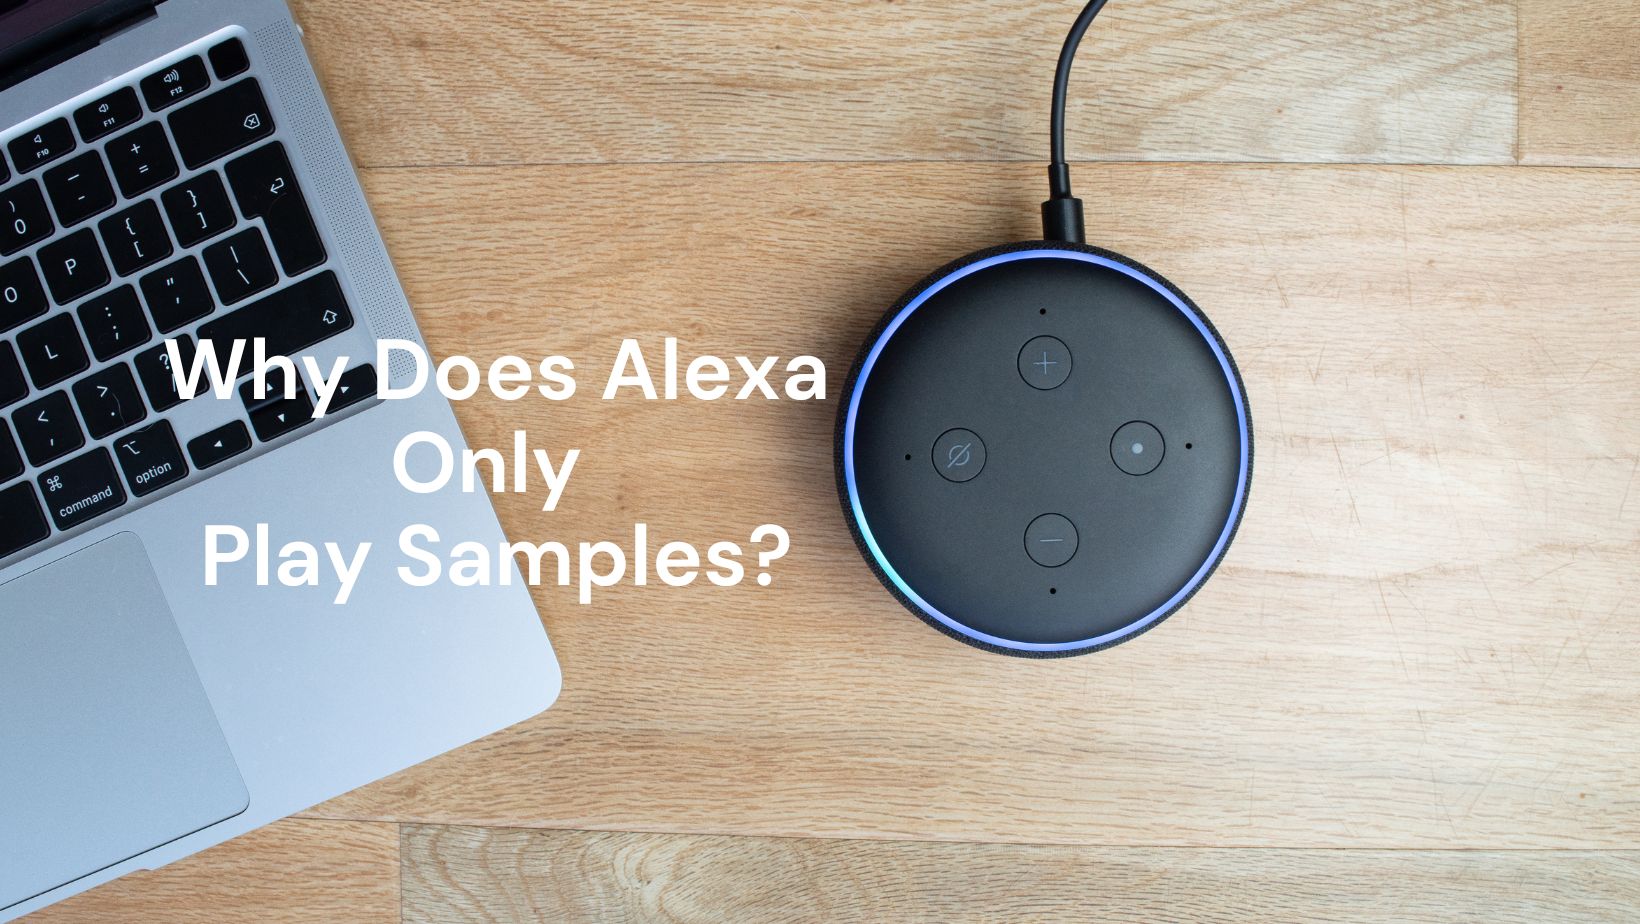 Why does Alexa only play samples?